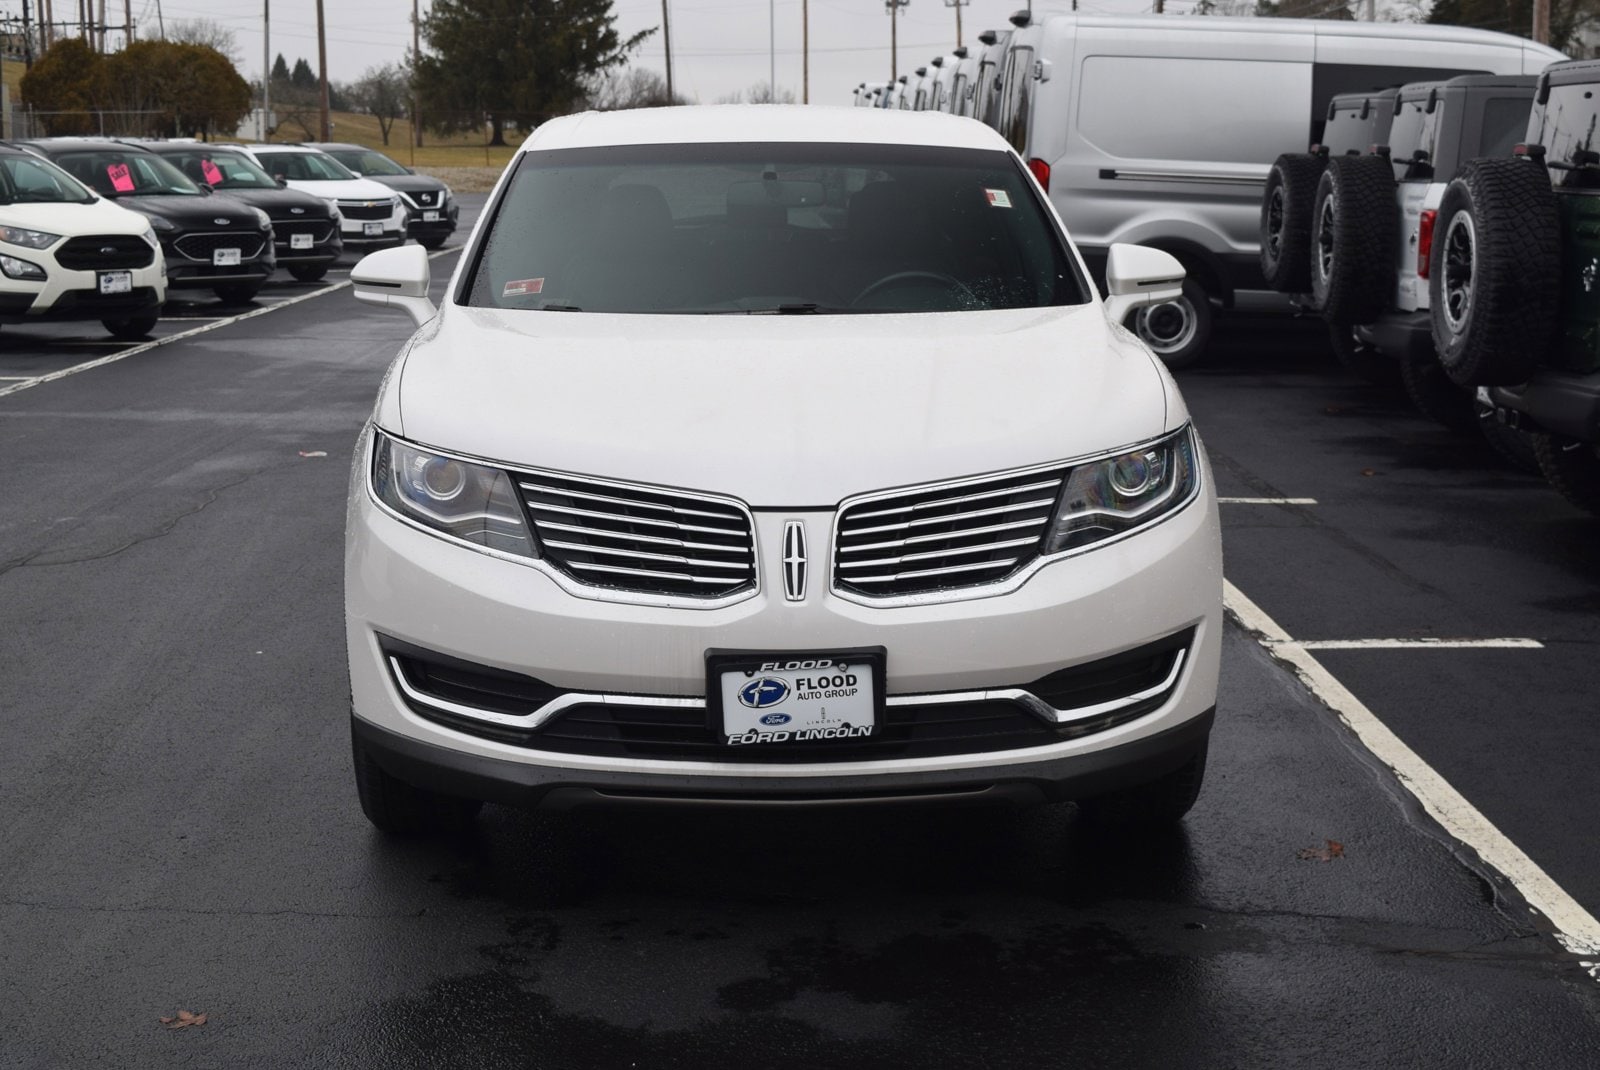 Used 2016 Lincoln MKX Select with VIN 2LMTJ8KR8GBL27324 for sale in Narragansett, RI